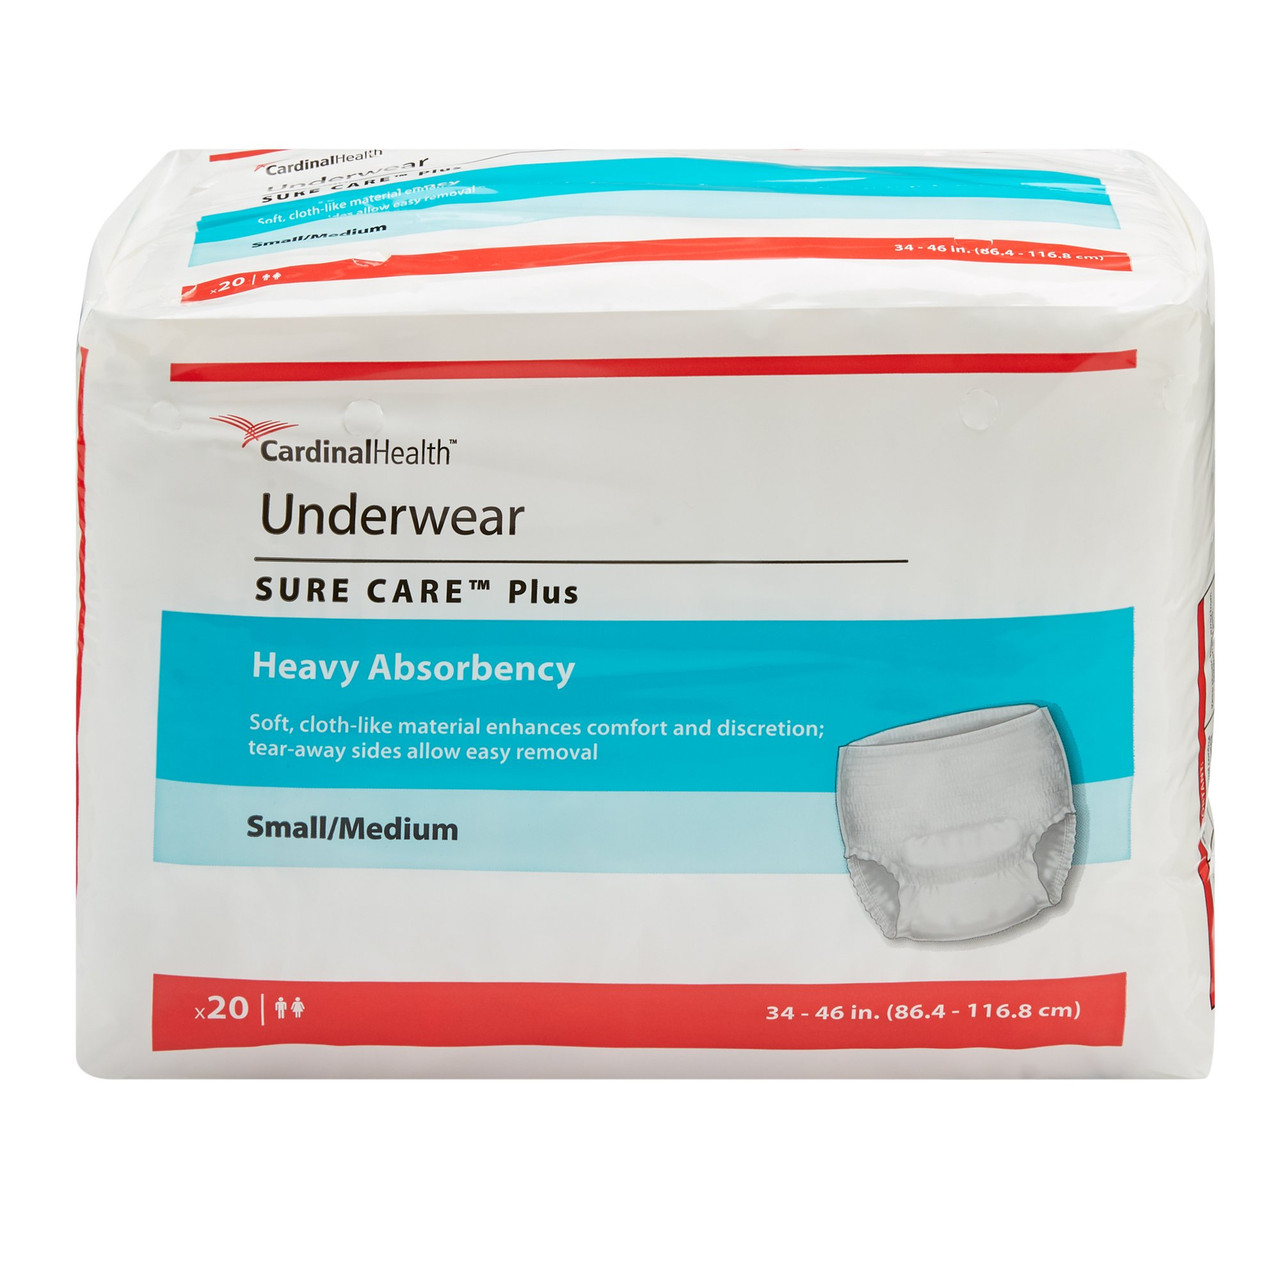 Sure Care Plus Incontinence Underwear, Heavy Absorbency - Unisex